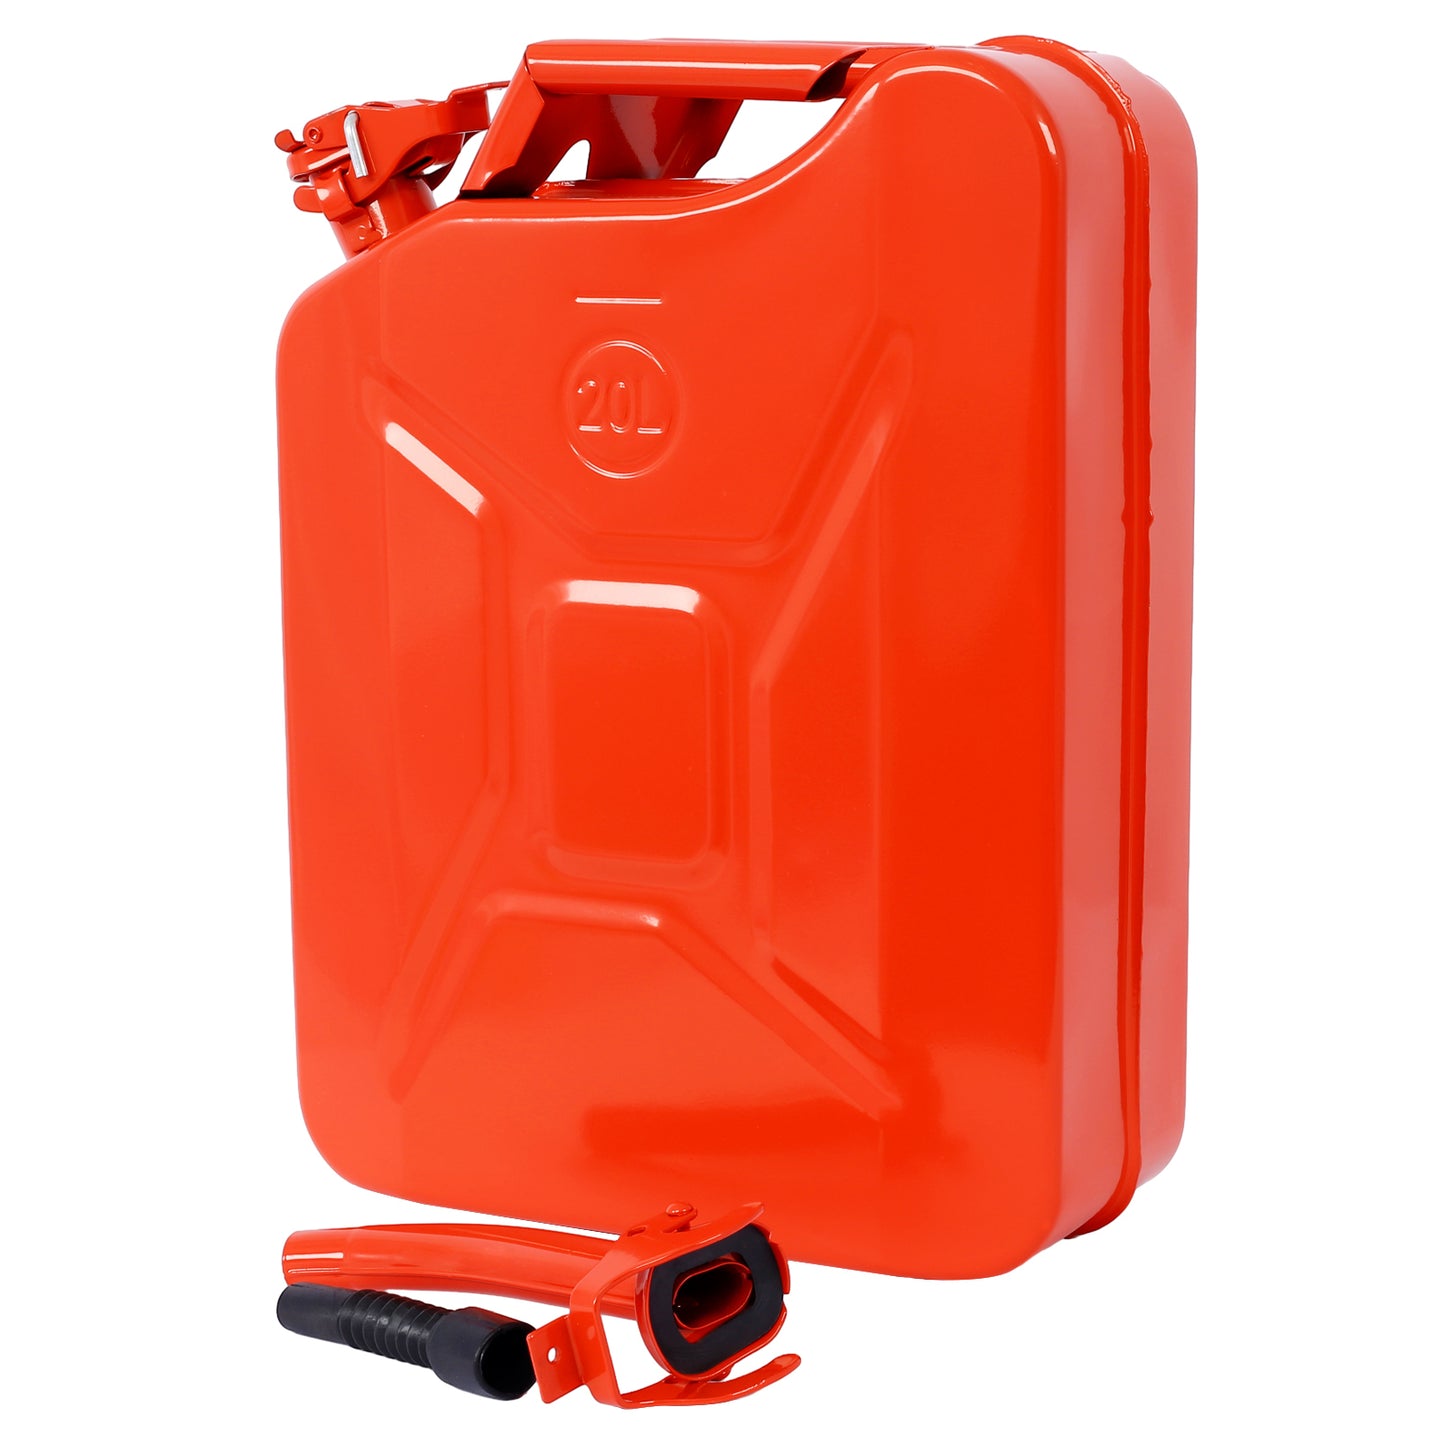 20 Liter (5 Gallon) Jerry Fuel Can with Flexible Spout, Portable Jerry Cans Fuel Tank Steel Fuel Can, Fuels Gasoline Cars, Trucks, Equipment,  RED 3pcs/set